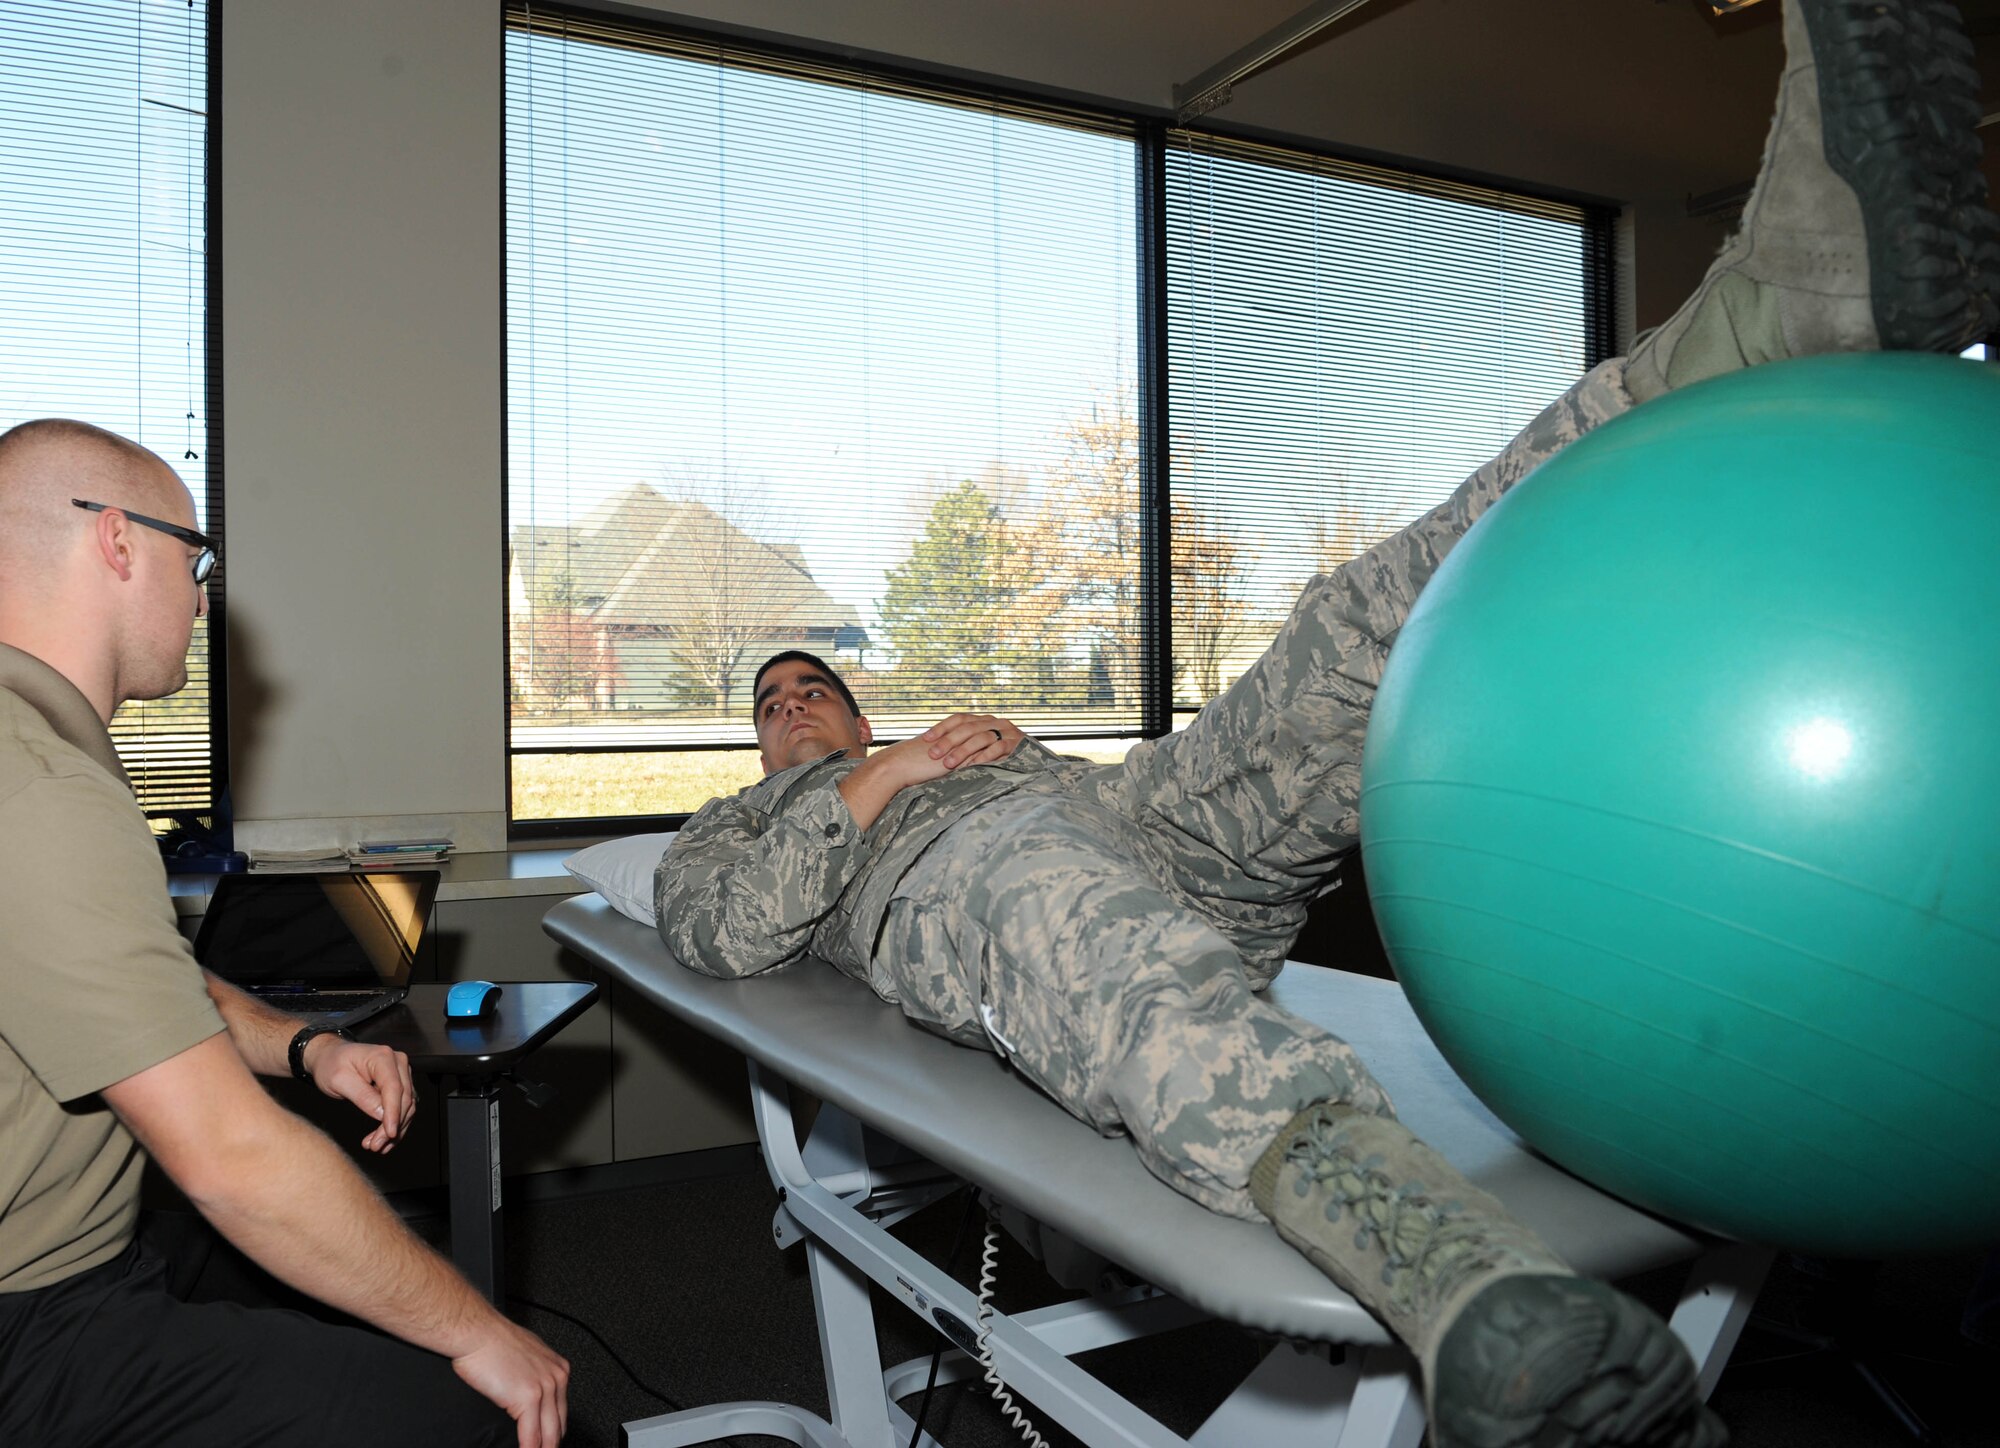 Airman 1st Class Jeffrey Langford, 22nd Security Forces Squadron elite guardsman, listens to Zane Ochs, his physical therapist, during a session, Jan. 15, in Wichita, Kan. Langford tore several ligaments in his knee during an intramural football game and is going through rehab to gain full active status. (U.S. Air Force photo/Airman 1st Class David Bernal Del Agua)